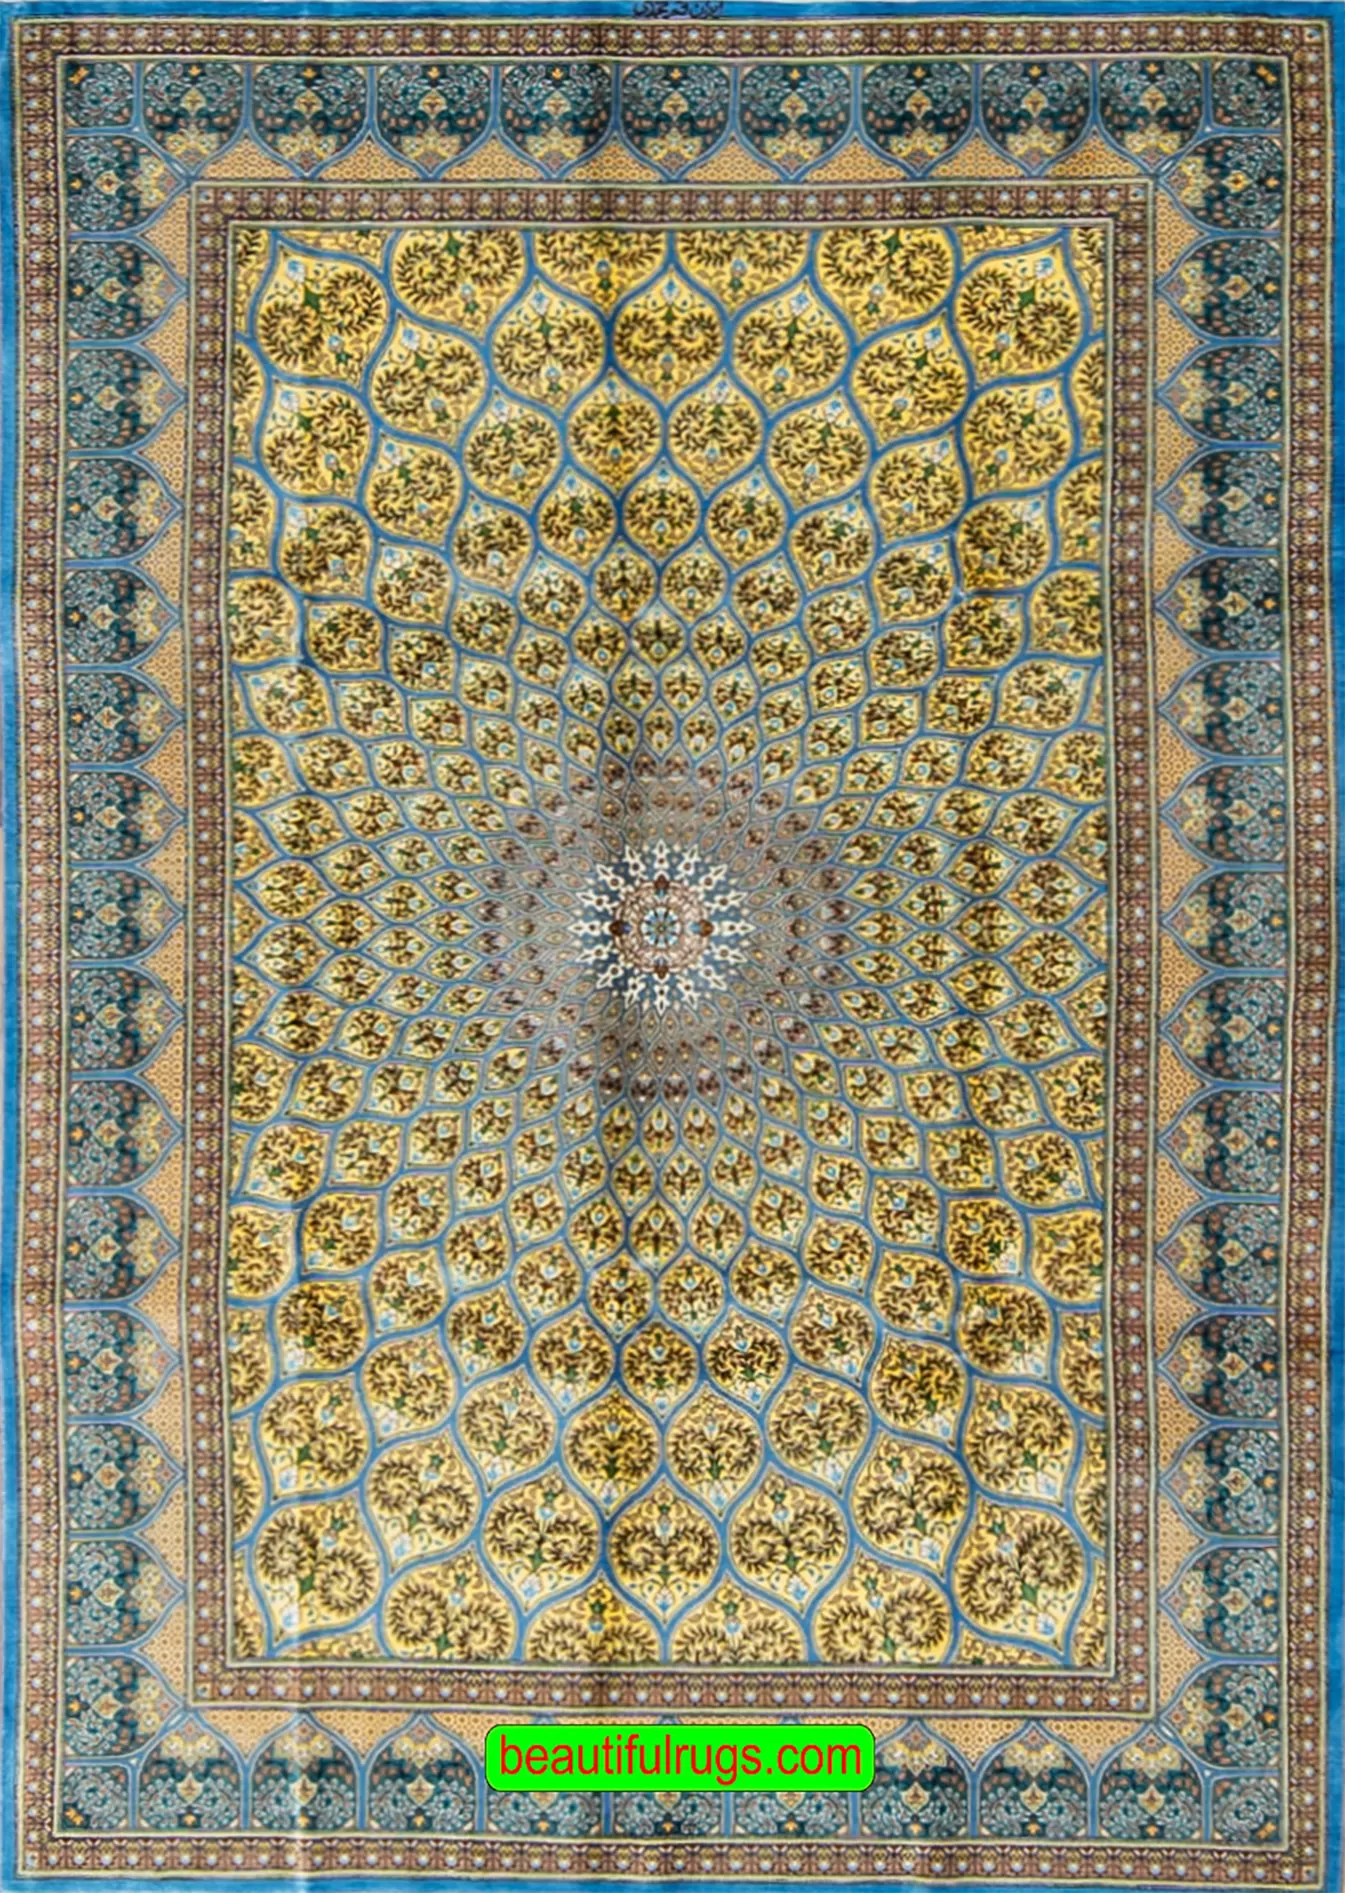 Silk Carpet from Iran, Mosque design, blue and gold color. Size 4.6x6.5